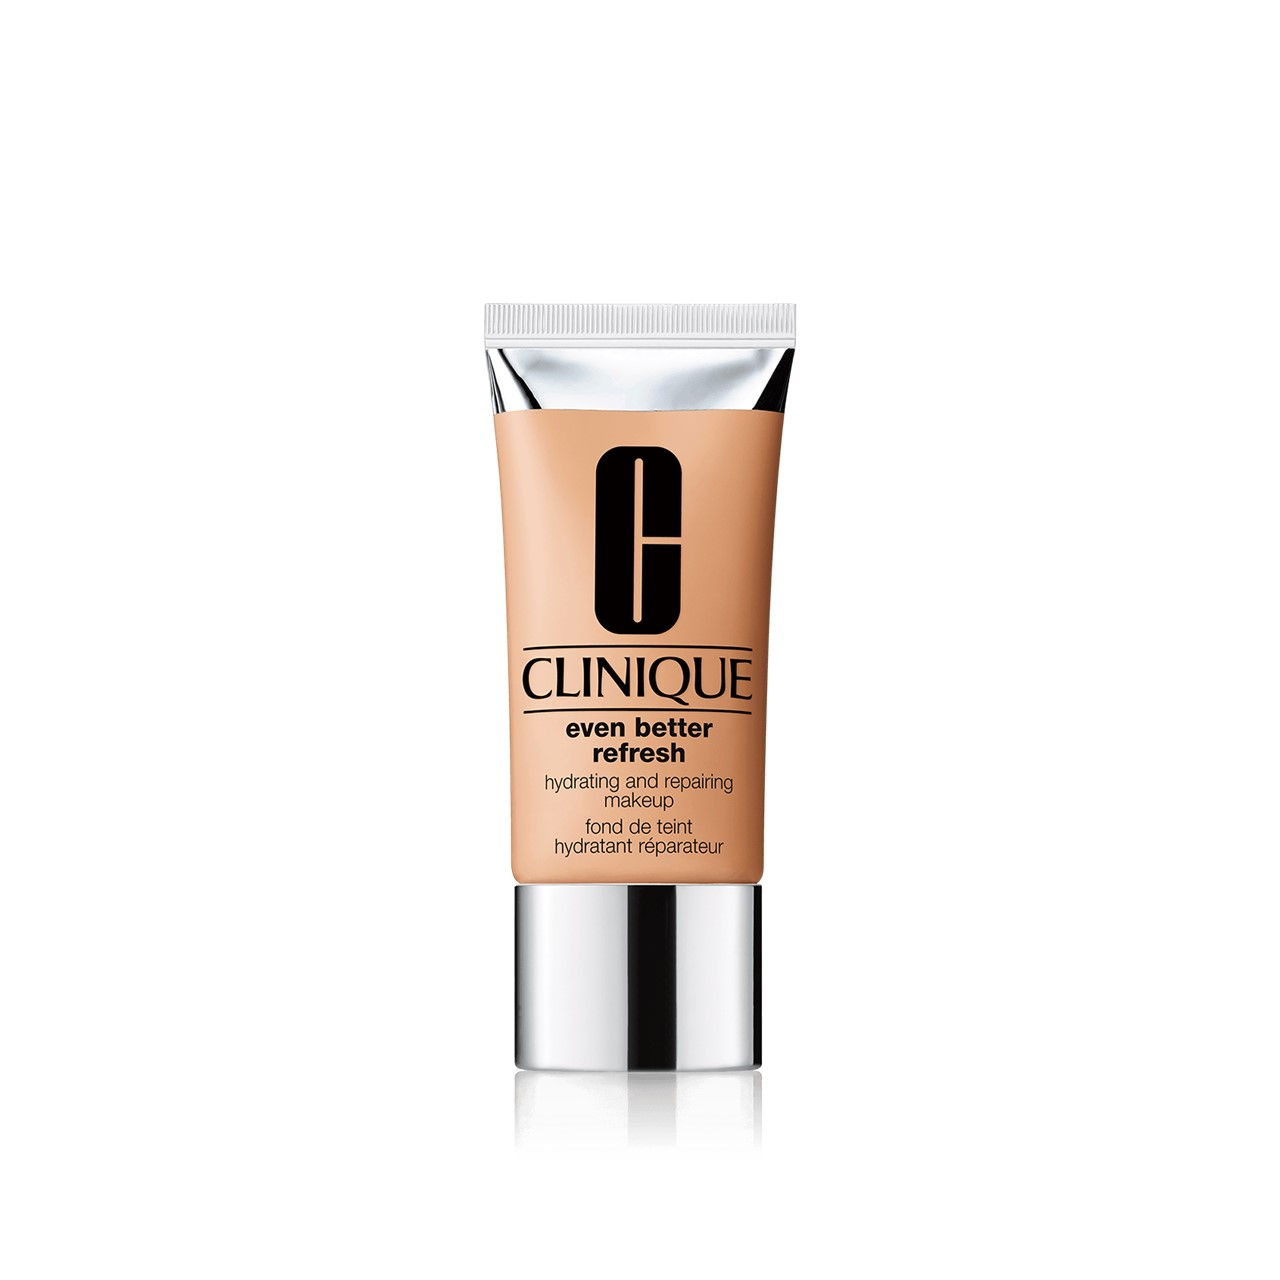 Clinique Even Better Refresh Foundation WN76 Toasted Wheat 30ml (1.01fl oz)